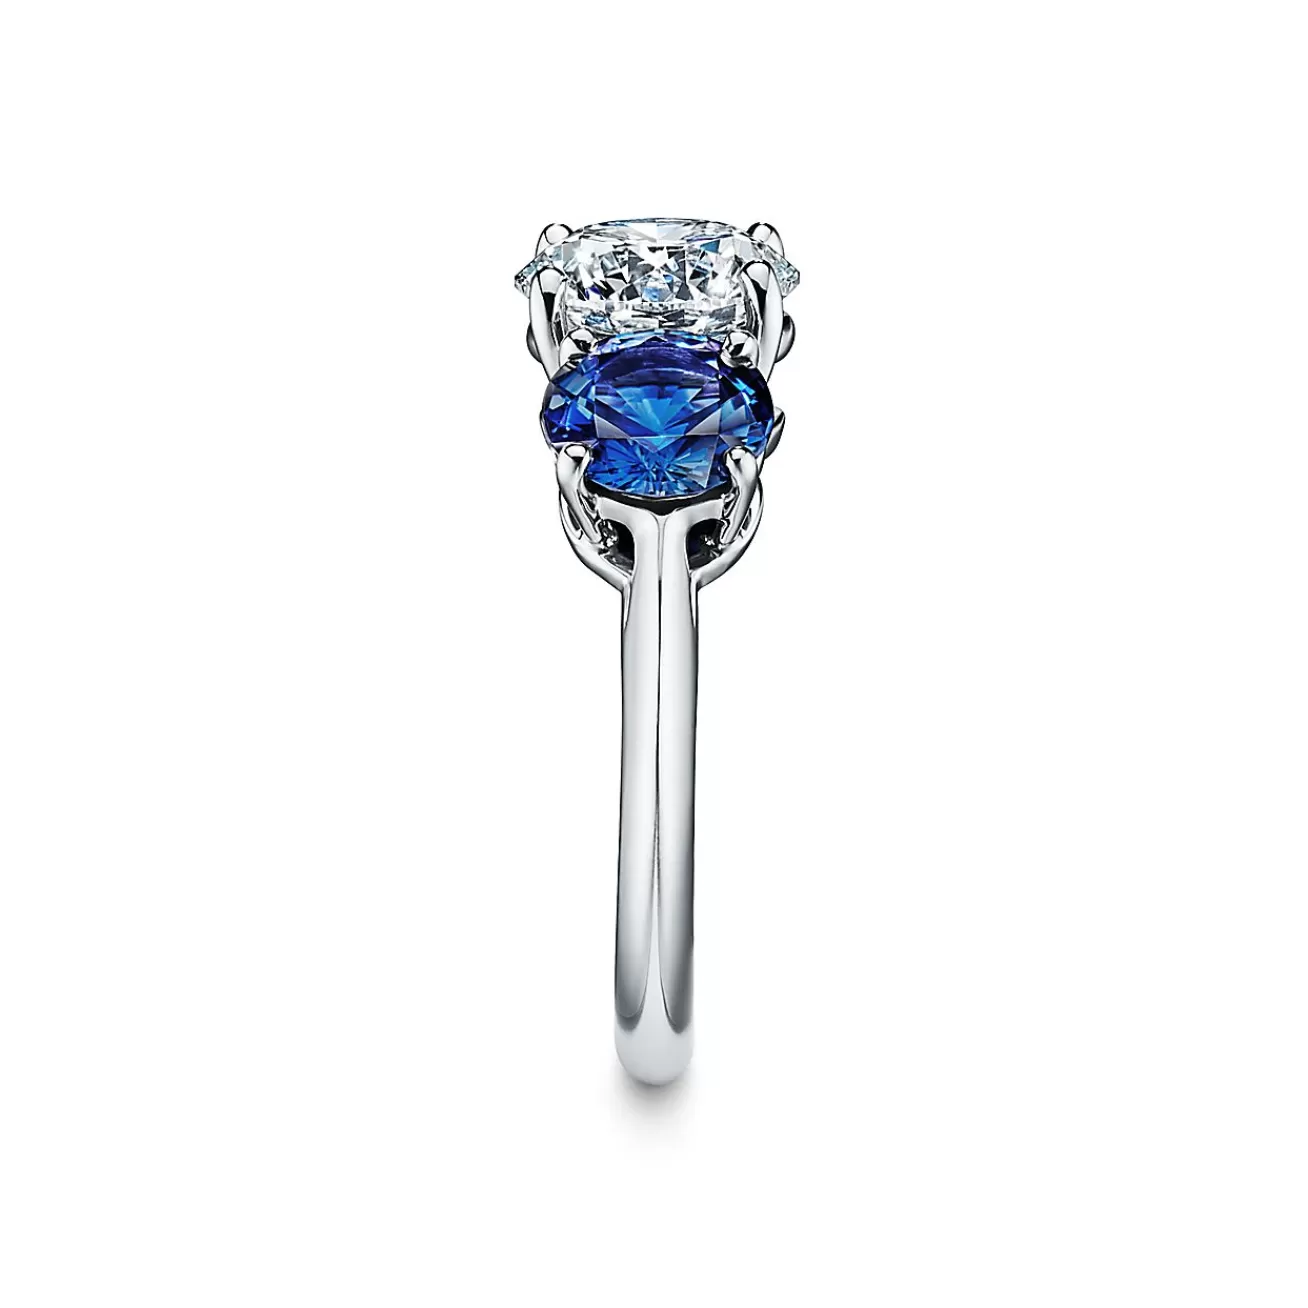 Tiffany & Co. Tiffany Three Stone engagement ring with sapphire side stones in platinum. | ^ Engagement Rings